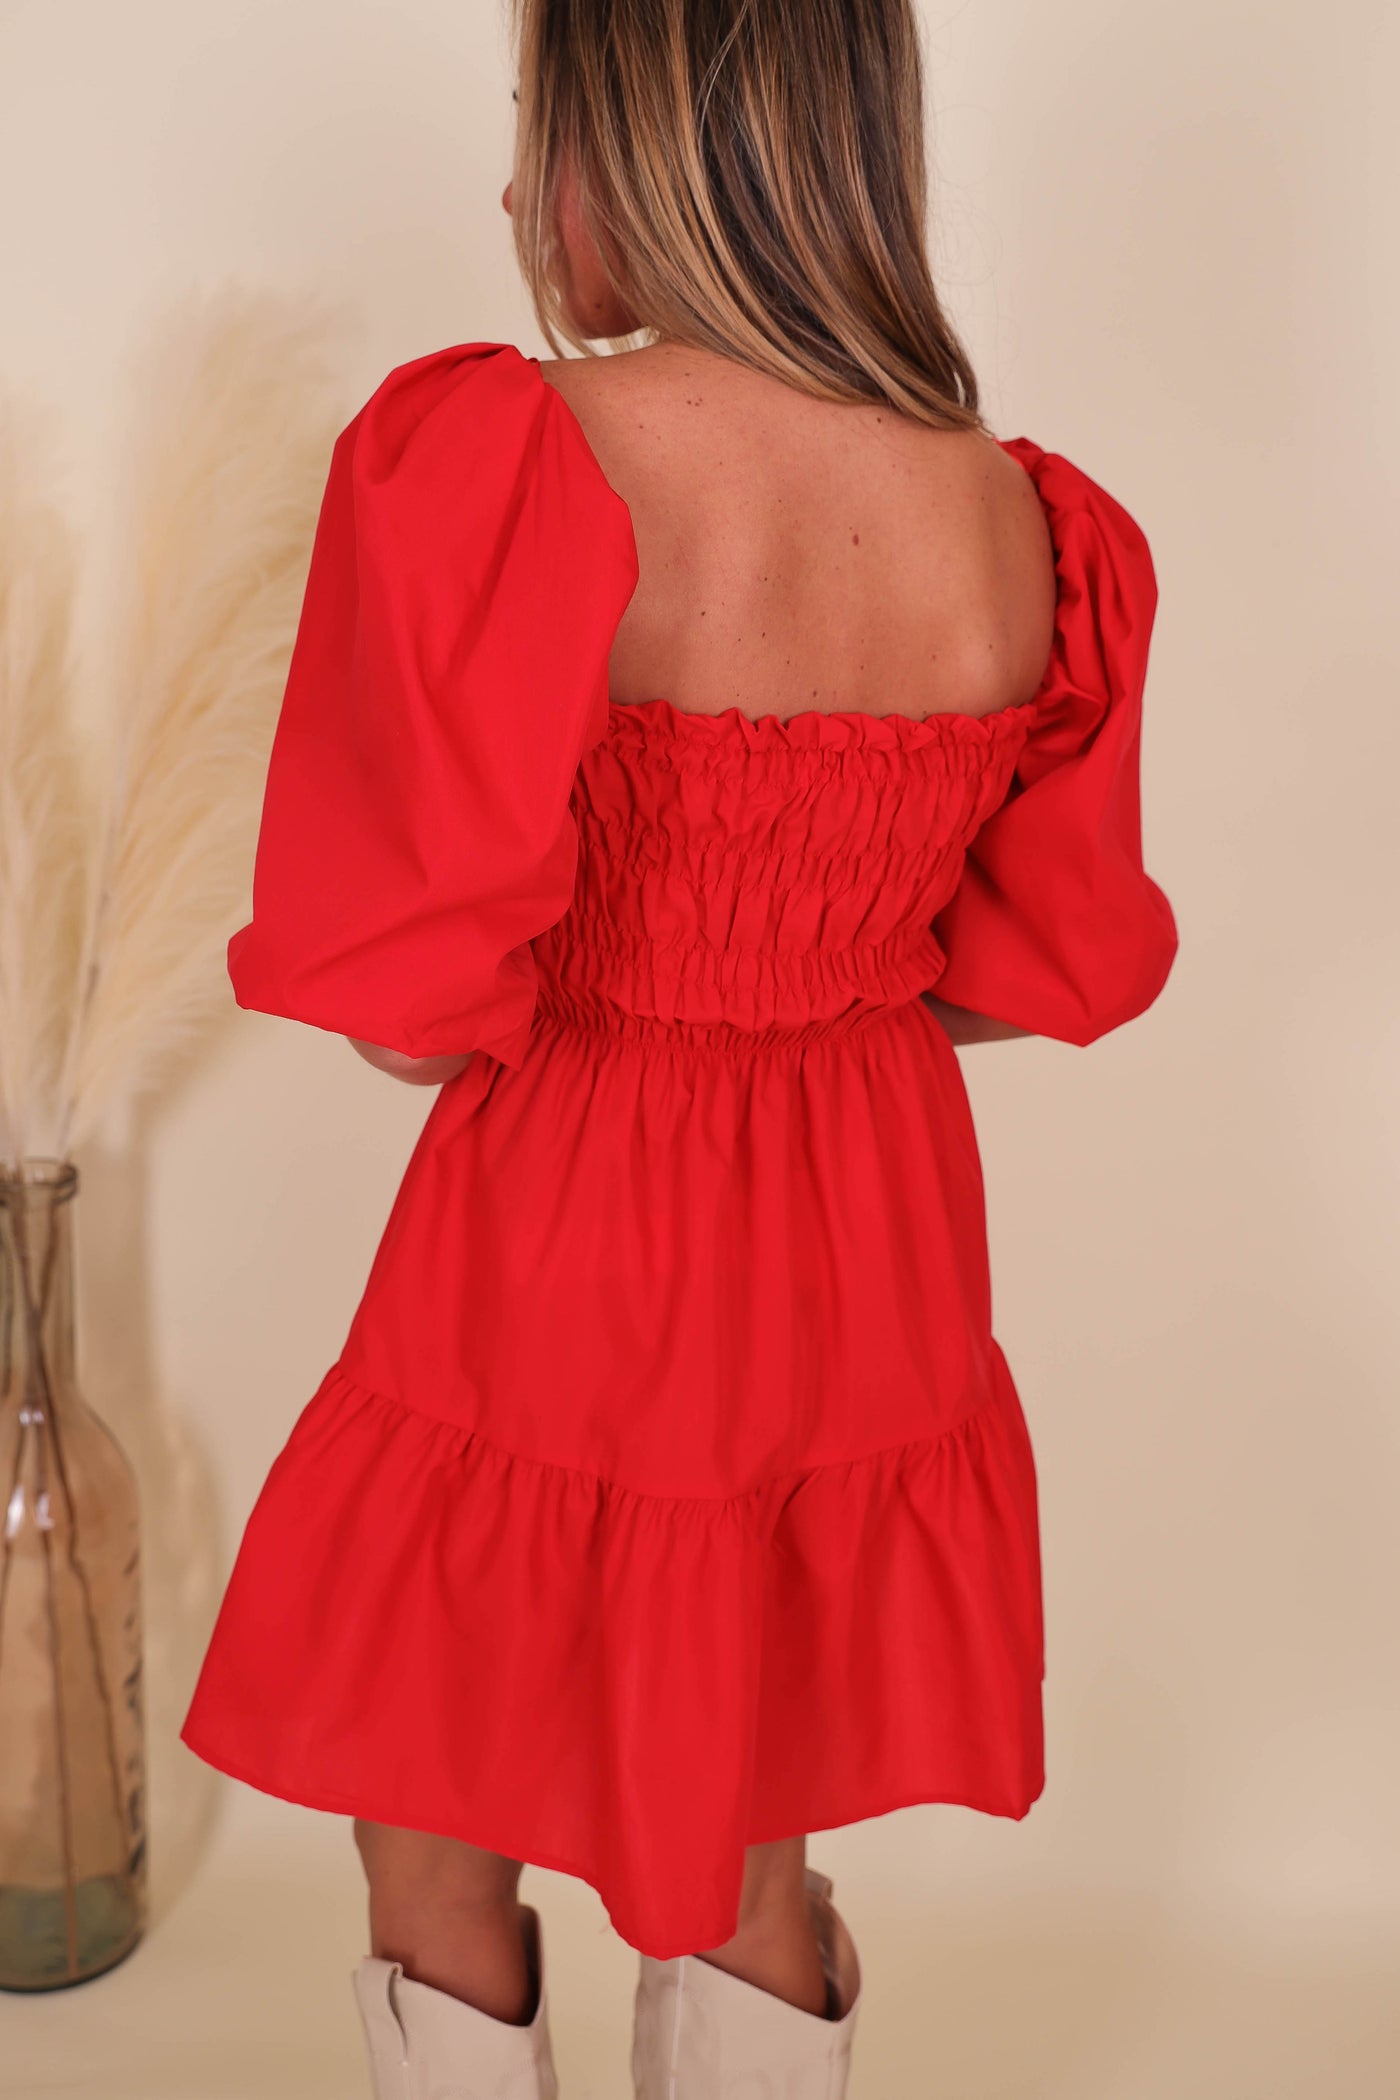 Darling Red Dress- Women's Puff Sleeve Red Dress- Girly Dresses